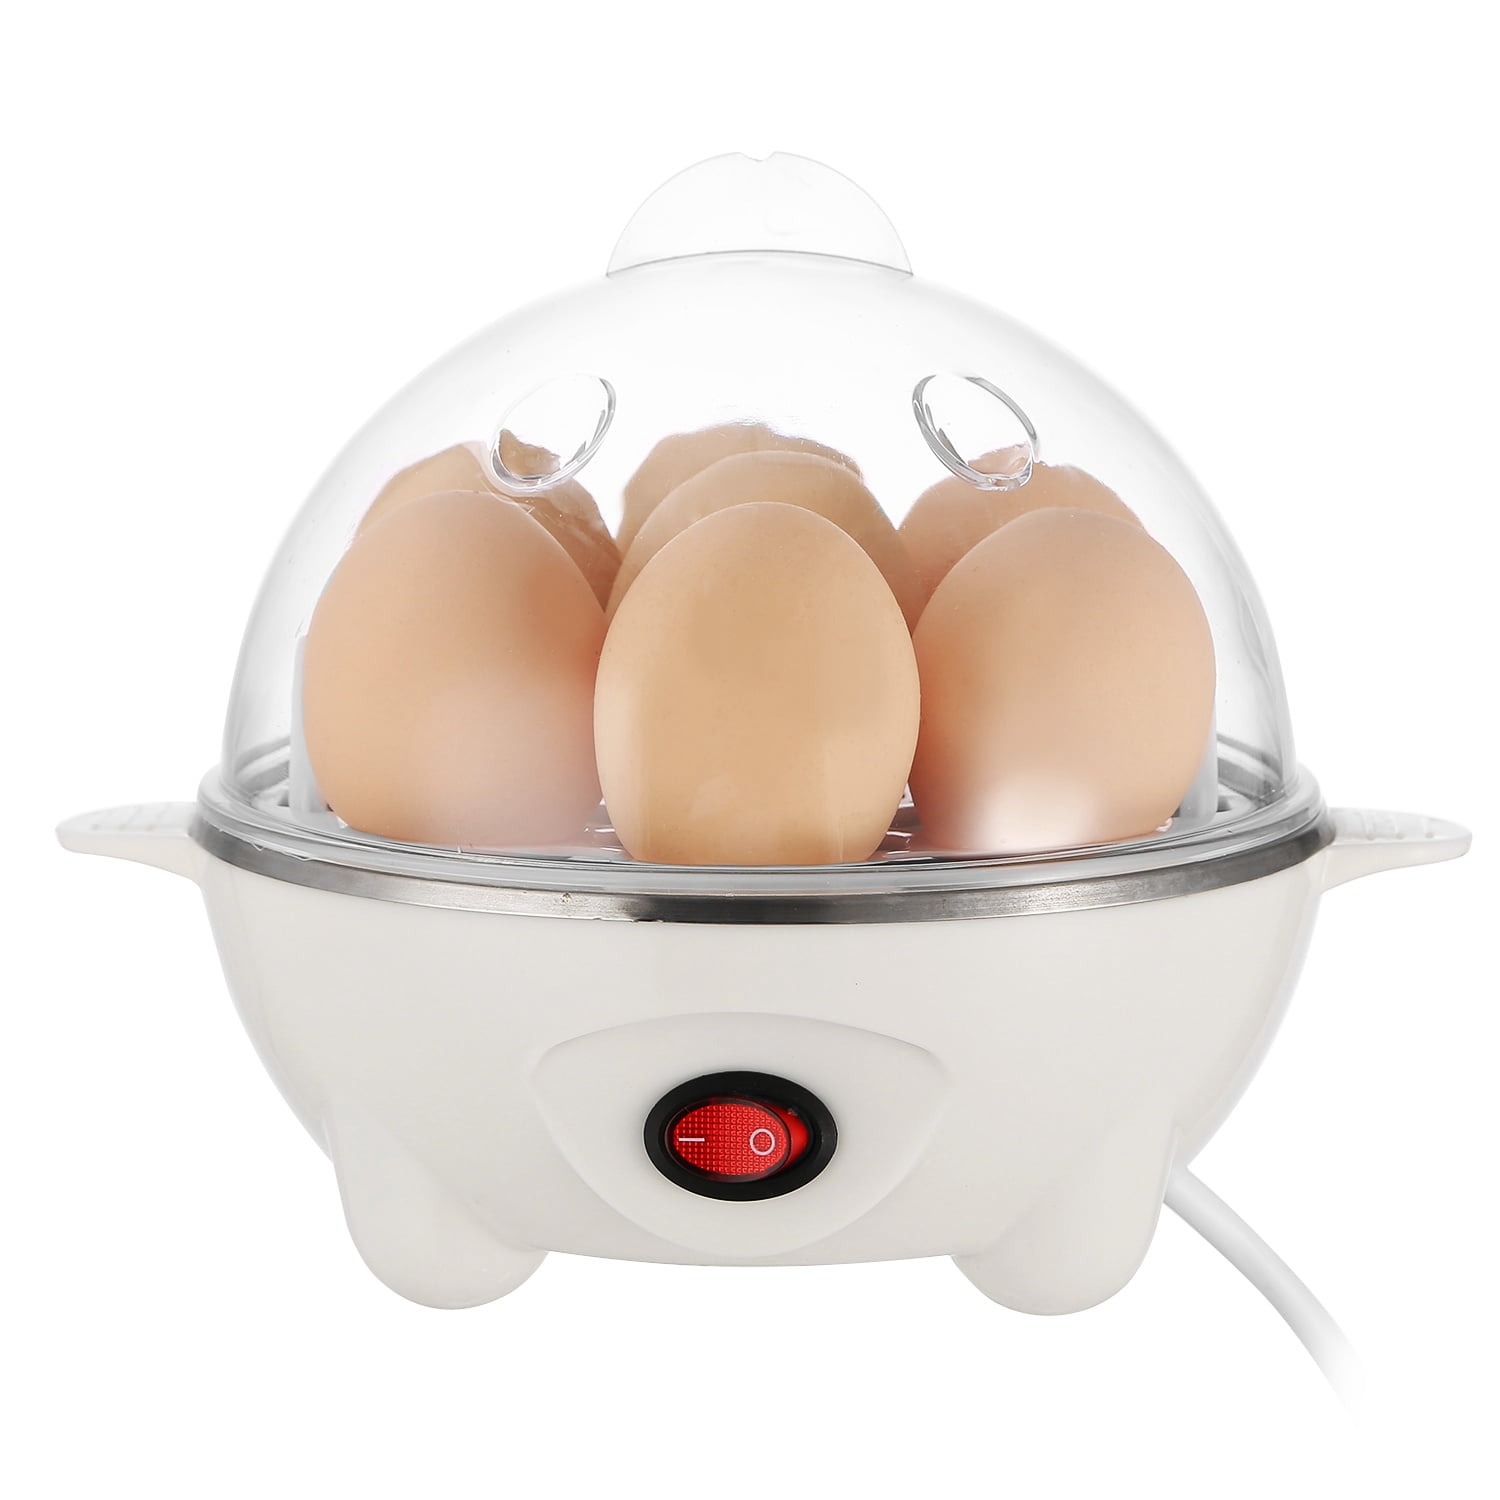 6/12 Pcs Egg Cooker Egglets Haird Boiled Without Shell Eggs Cooking Eggies Red 